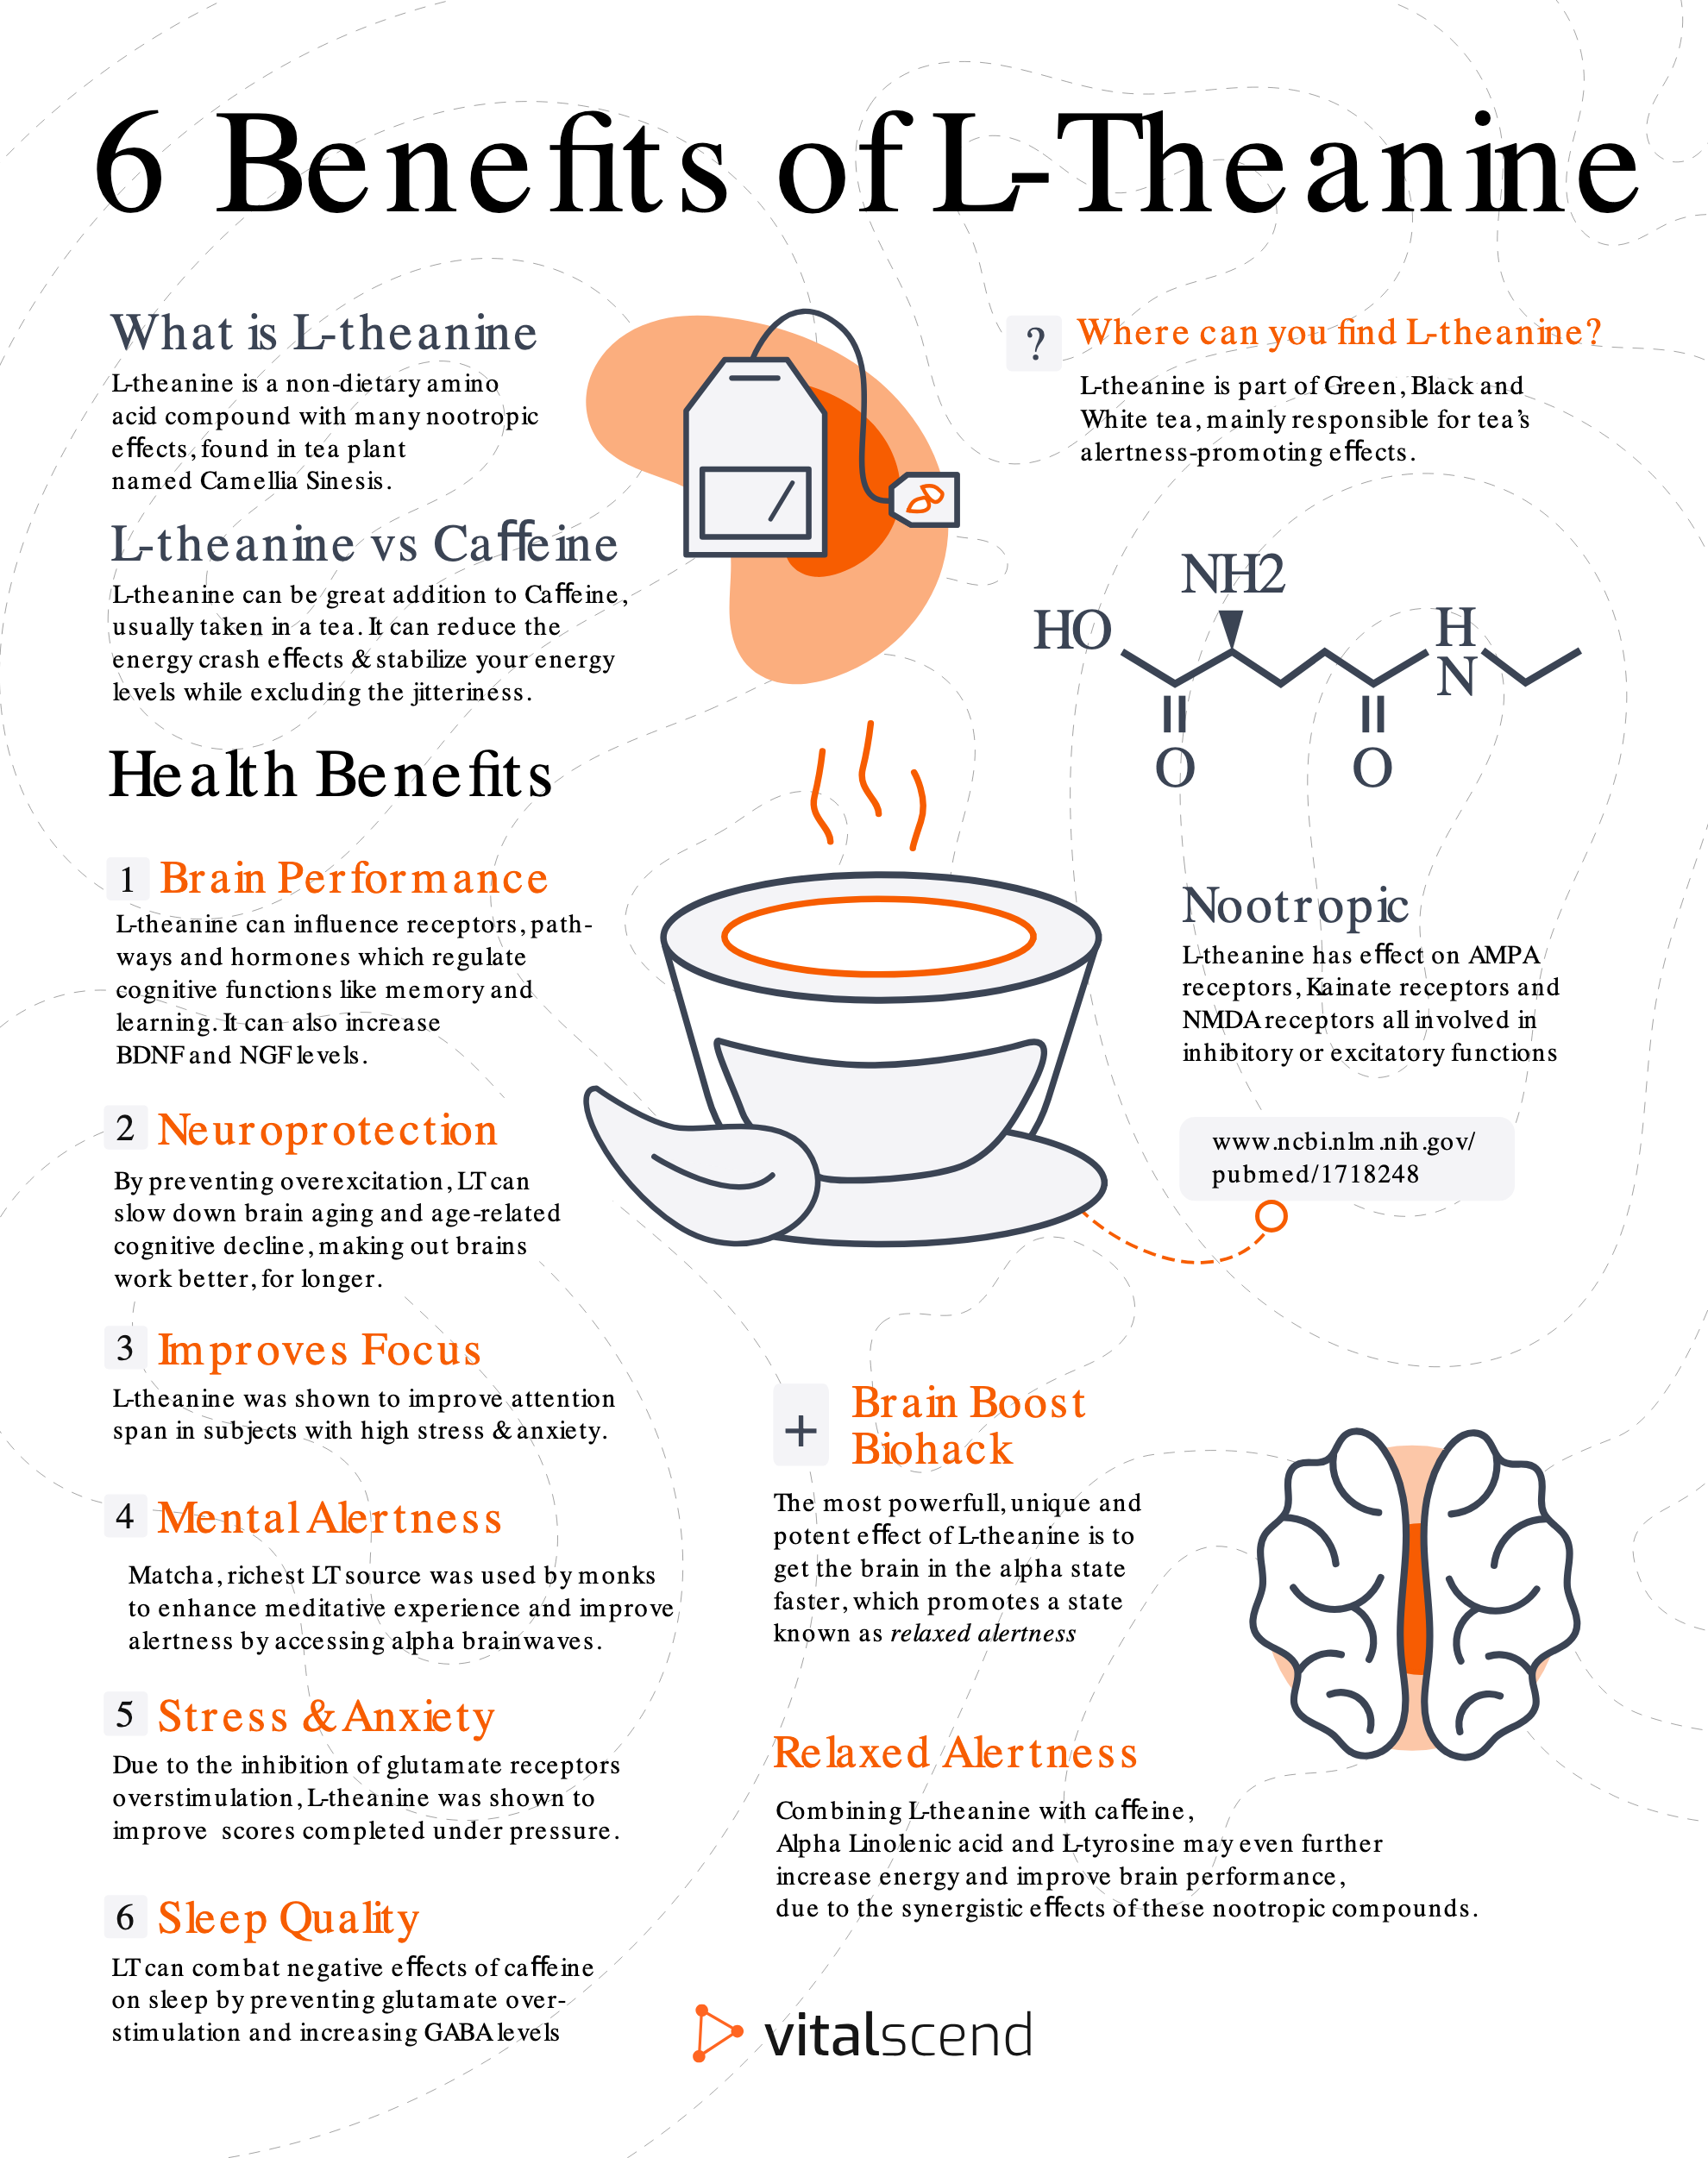 6 Benefits of L-theanine